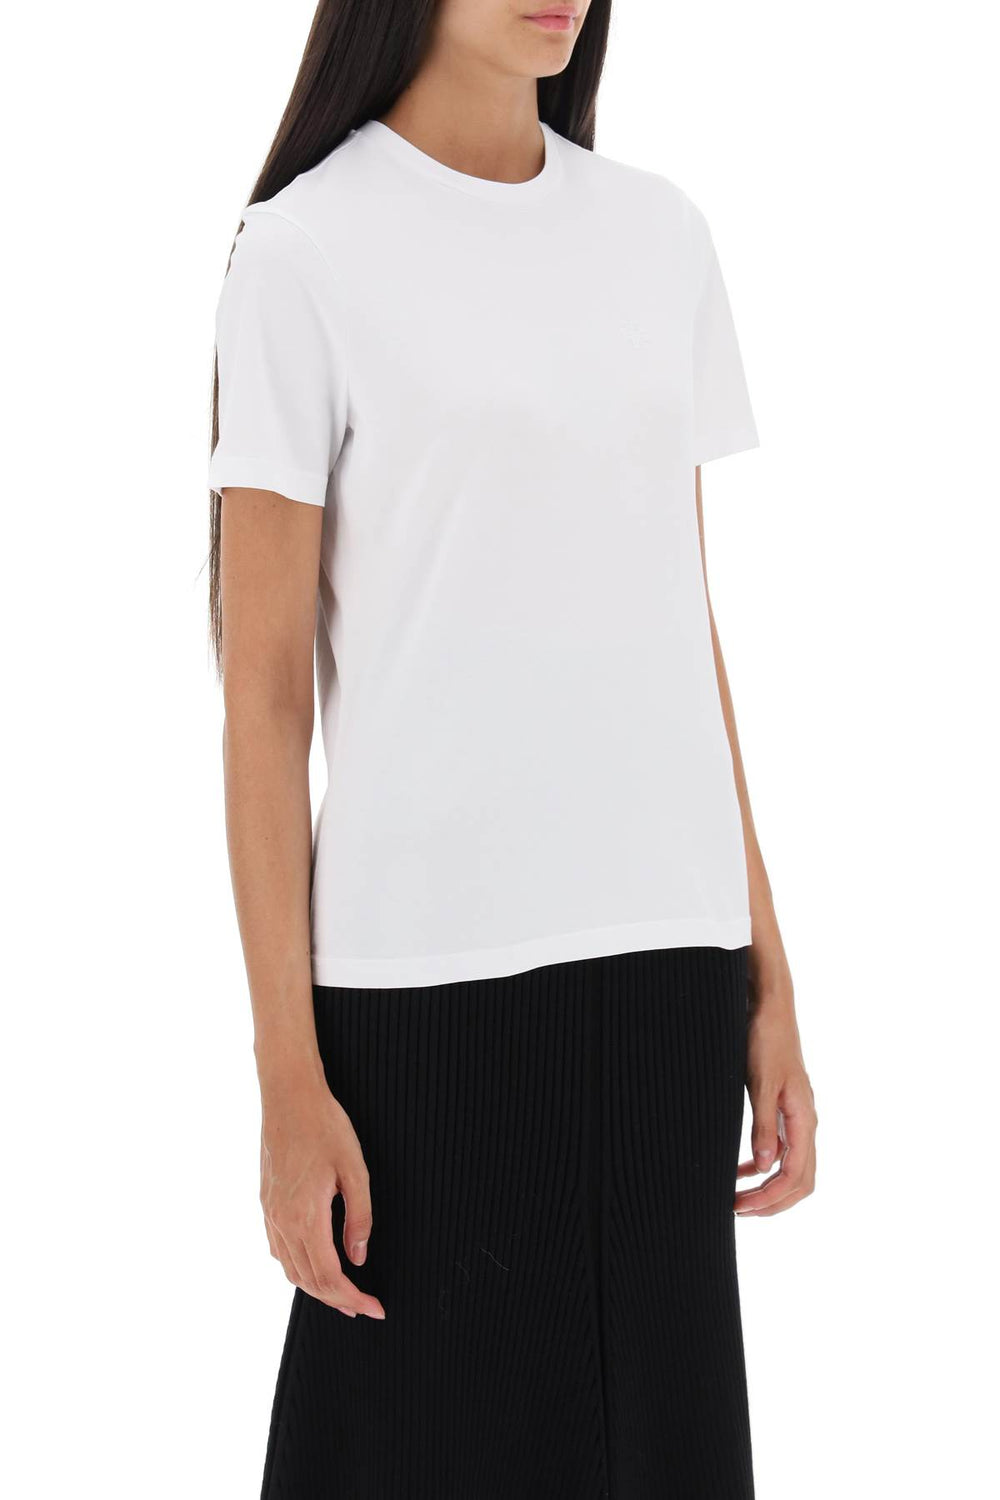 Tory burch regular t-shirt with embroidered logo-1